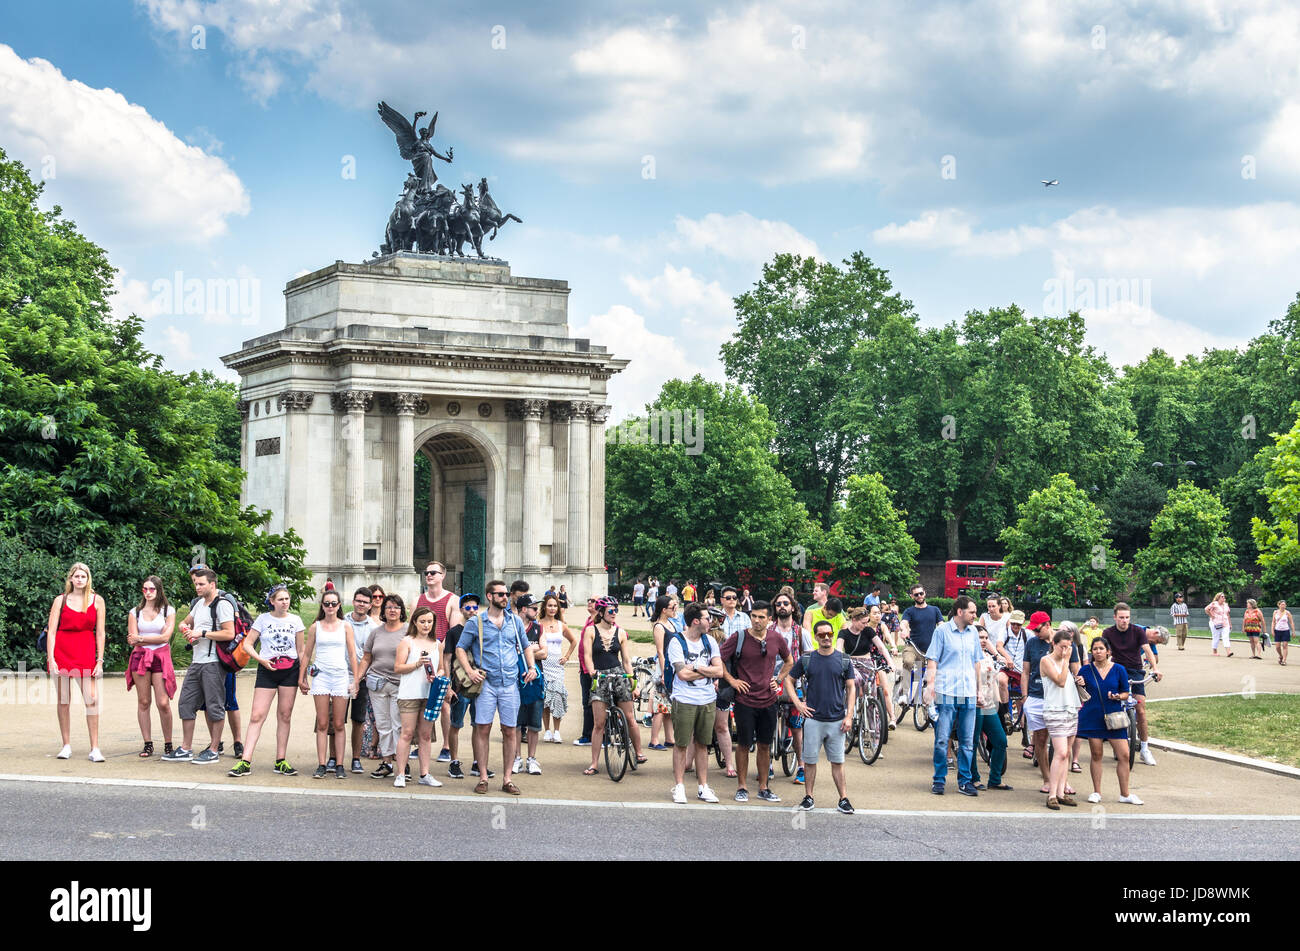 Wellington Arch at Green Park as tourists wait to cross into Hyde Park Stock Photo